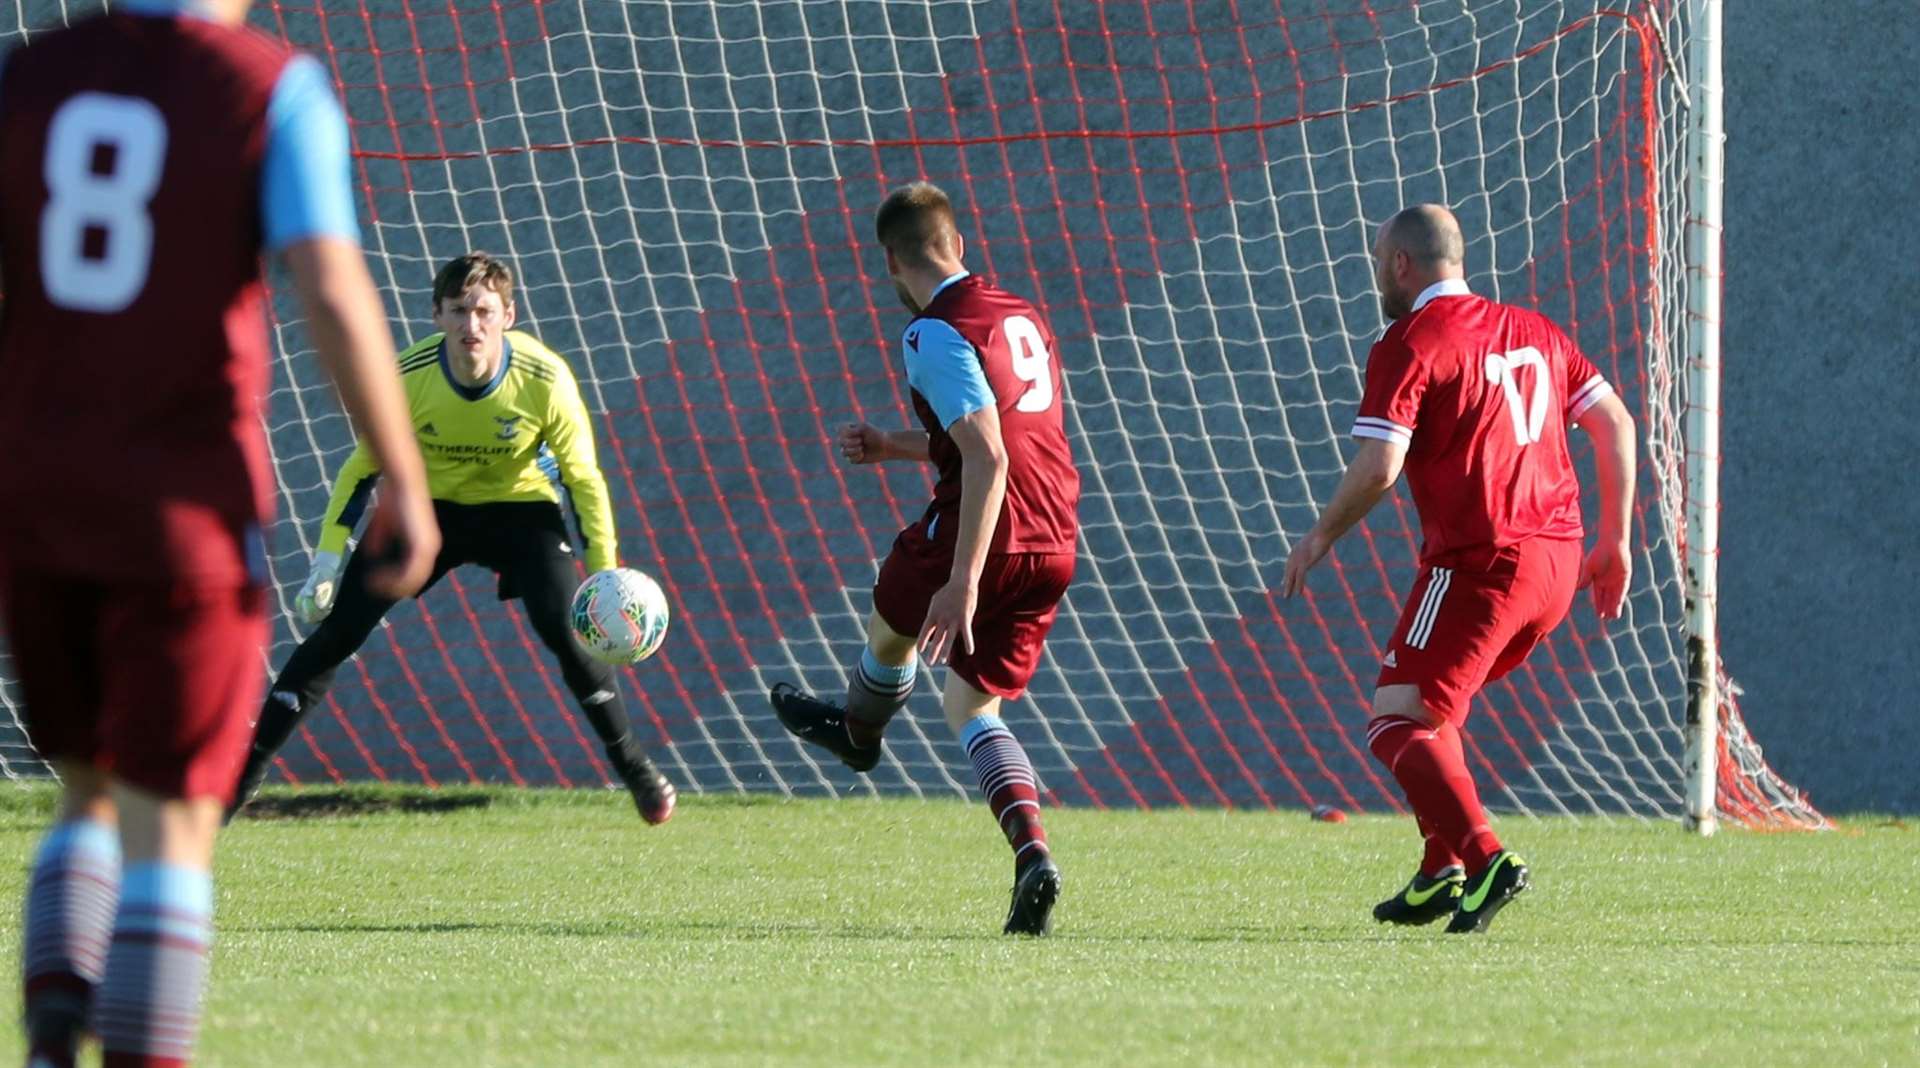 Pentland United's Marc Macgregor beats Kieran Macleod for the opening goal at the Upper Bignold on Wednesday night. Picture: James Gunn